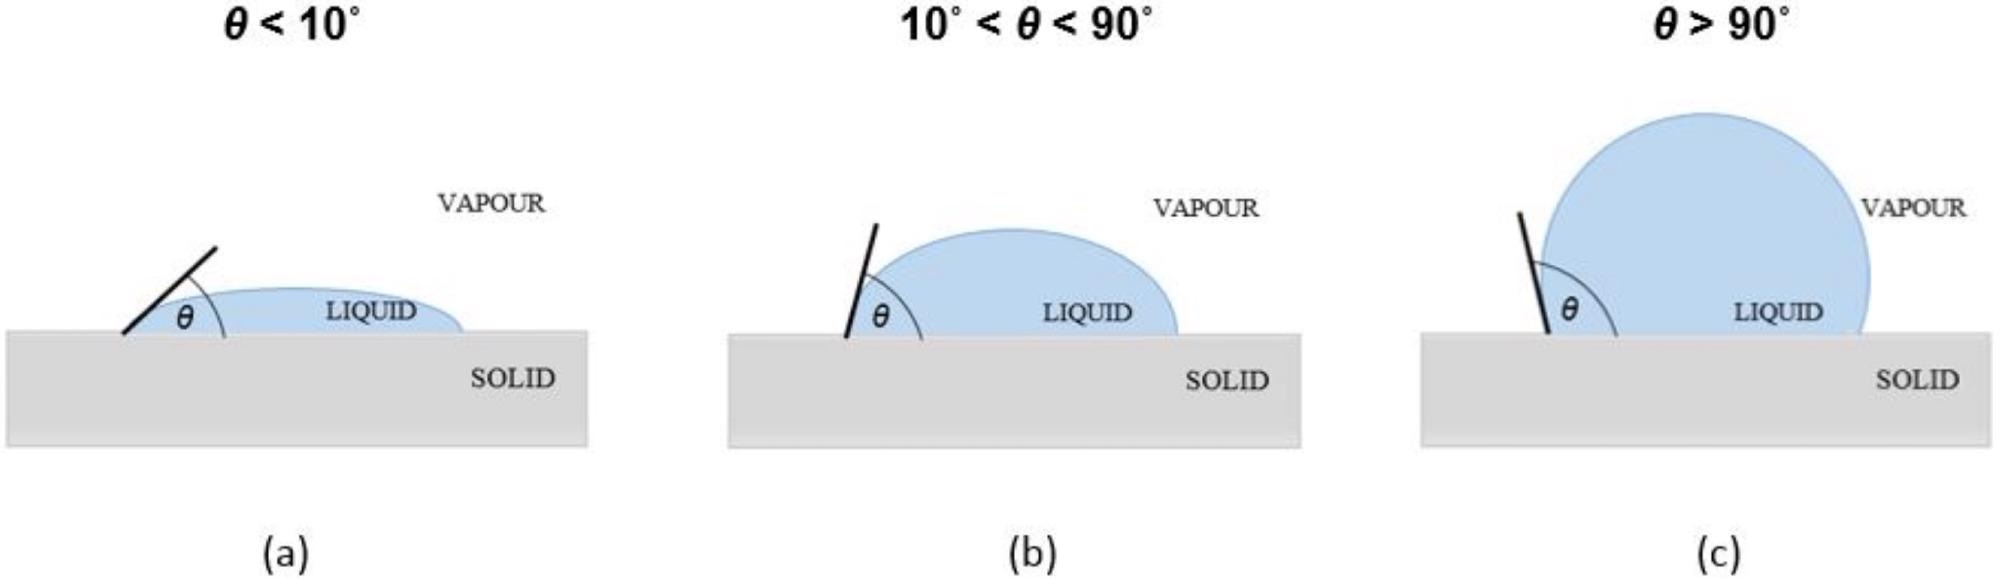 Different cases of liquid contact angle on surfaces specifying wettability: (a) high wettability, (b) medium wettability, and (c) low wettability.